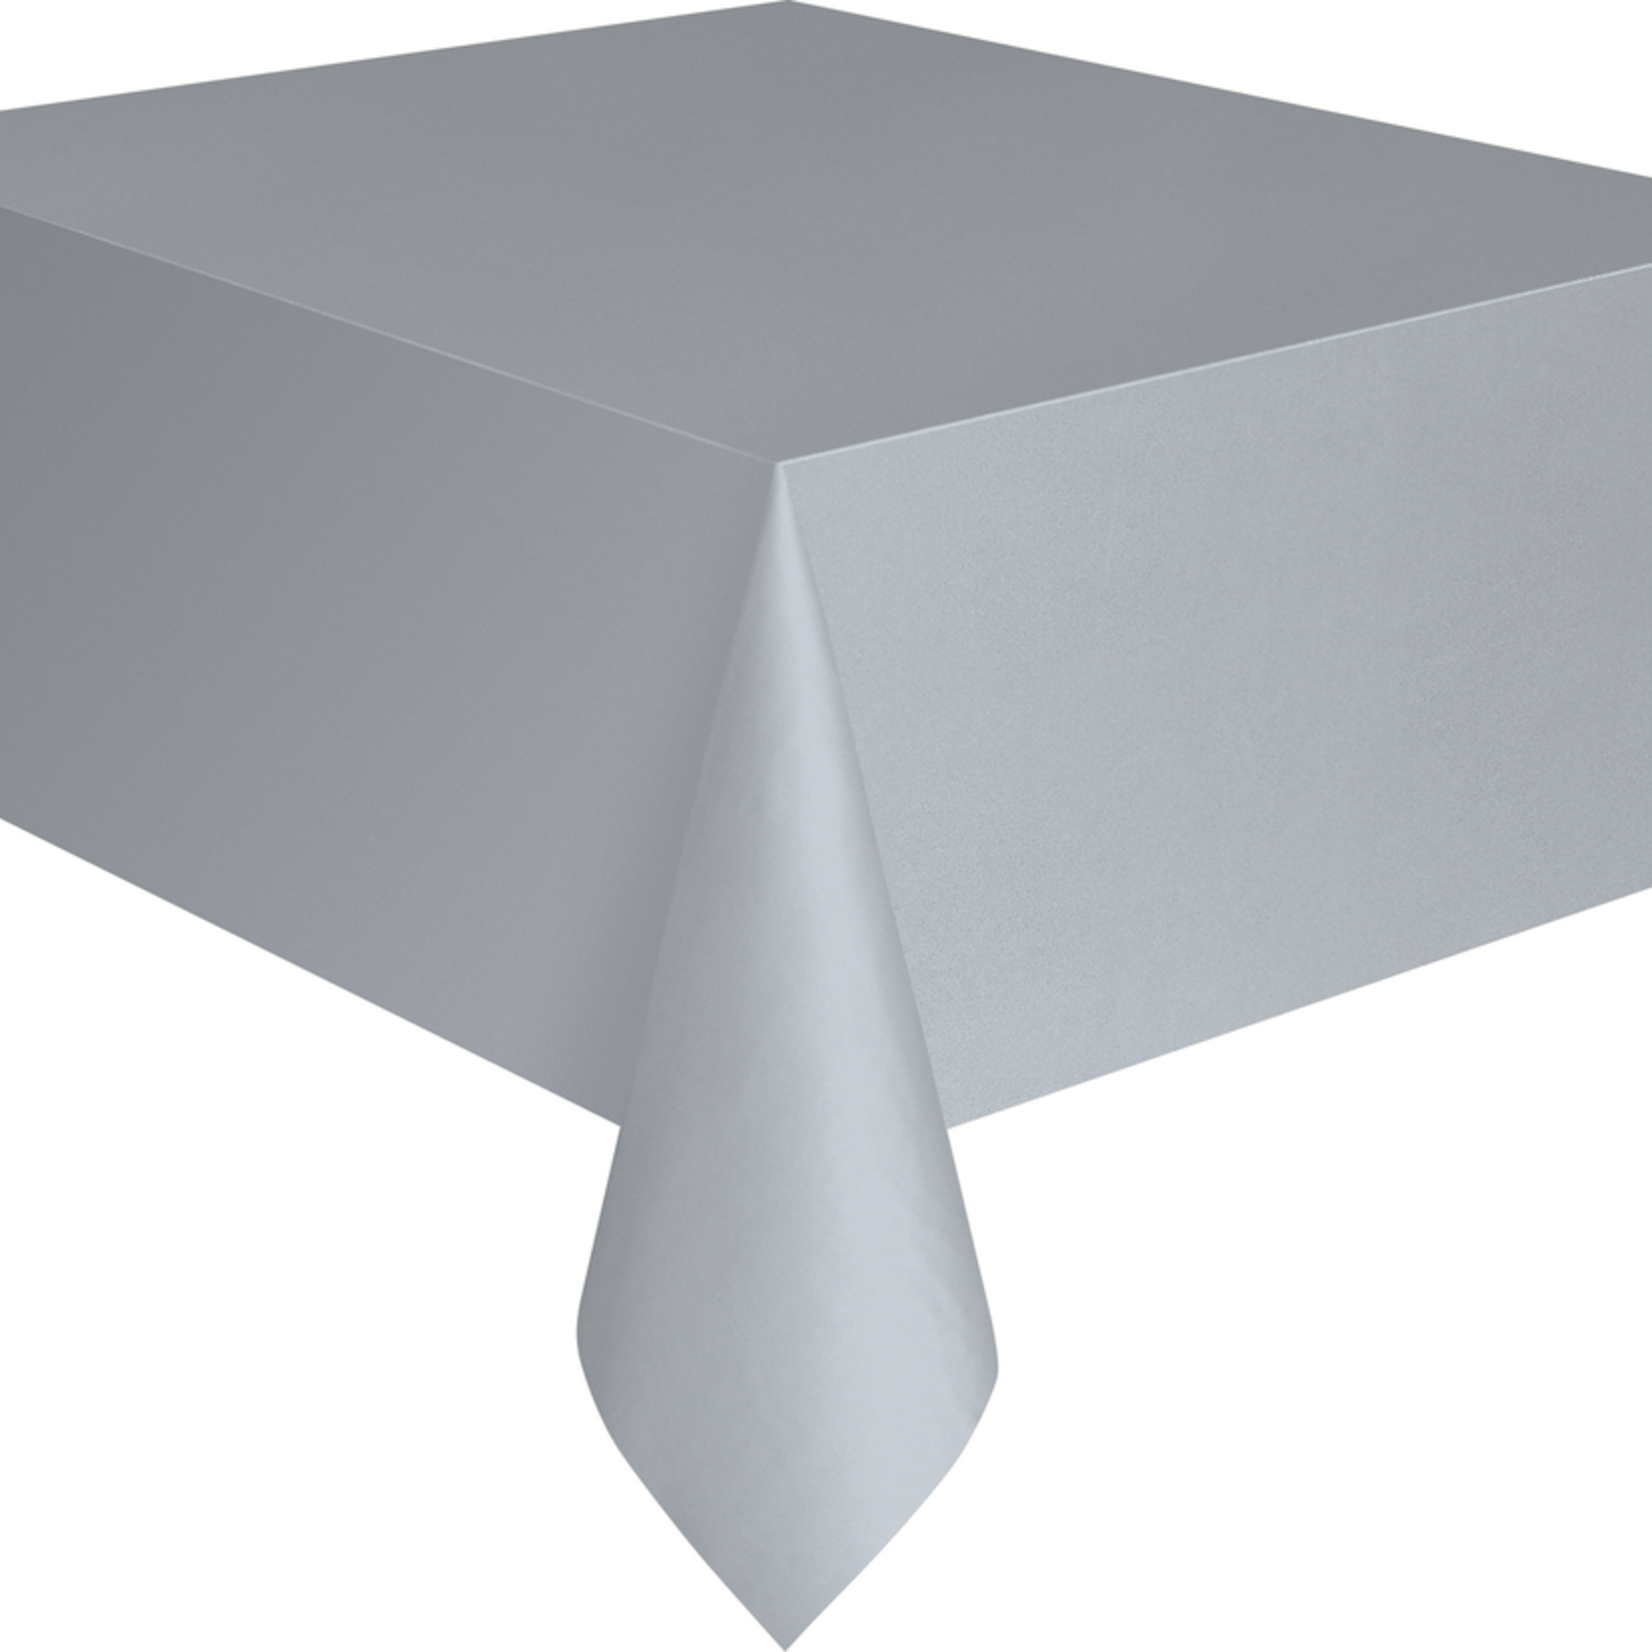 Plastic Tablecover 54""x108"" -Silver